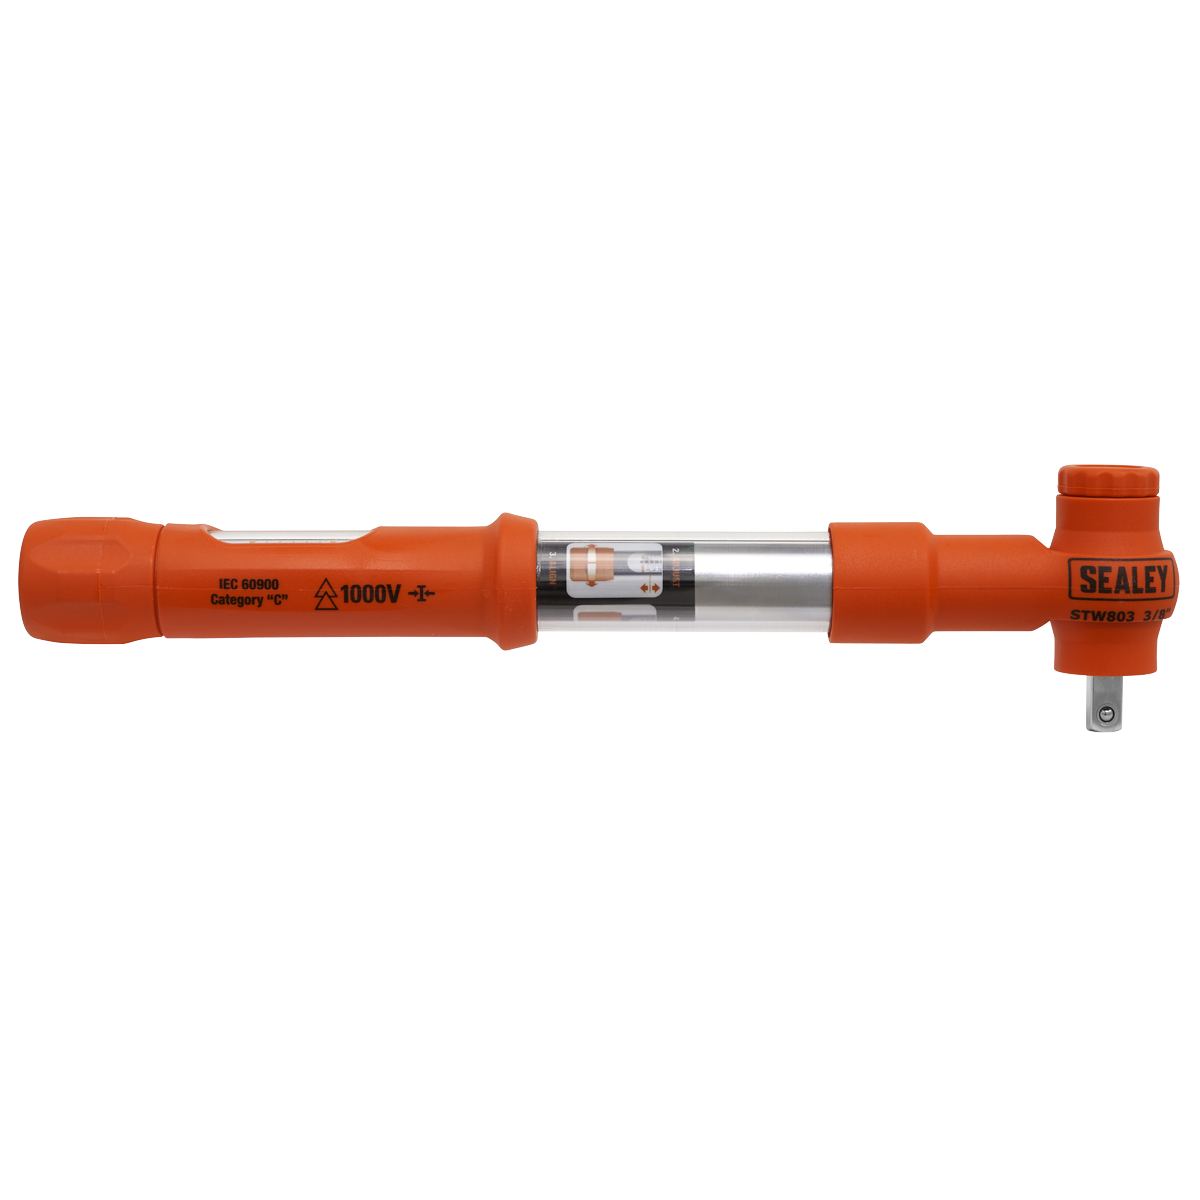 Torque Wrench Insulated 3/8"Sq Drive 12-60Nm